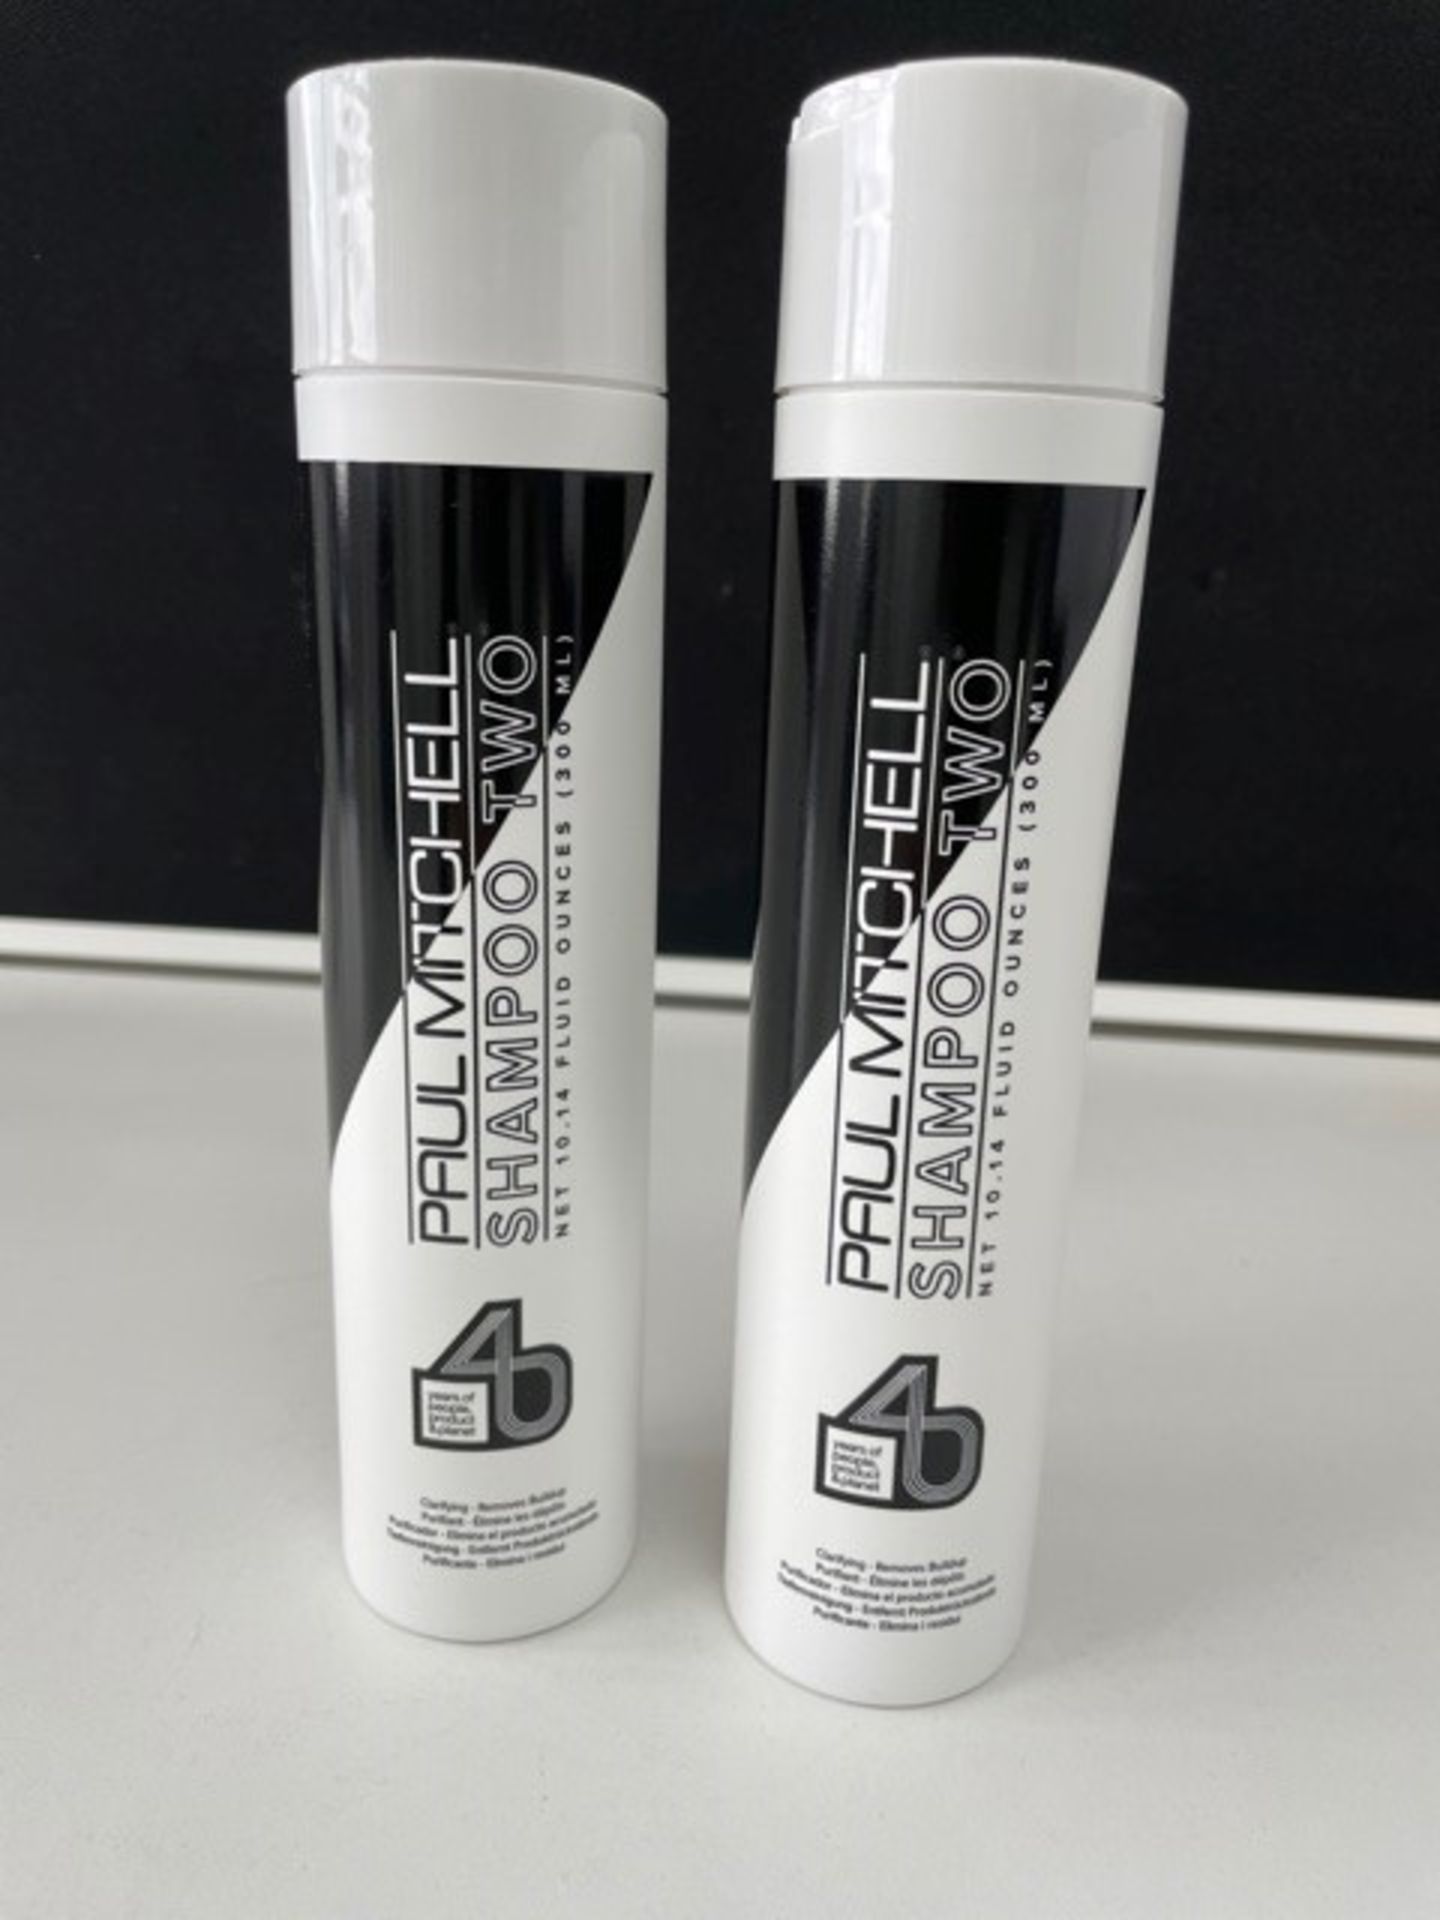 6 x Paul Mitchell Hair Care Products | See photographs and description | Total RRP £80 - Image 4 of 4